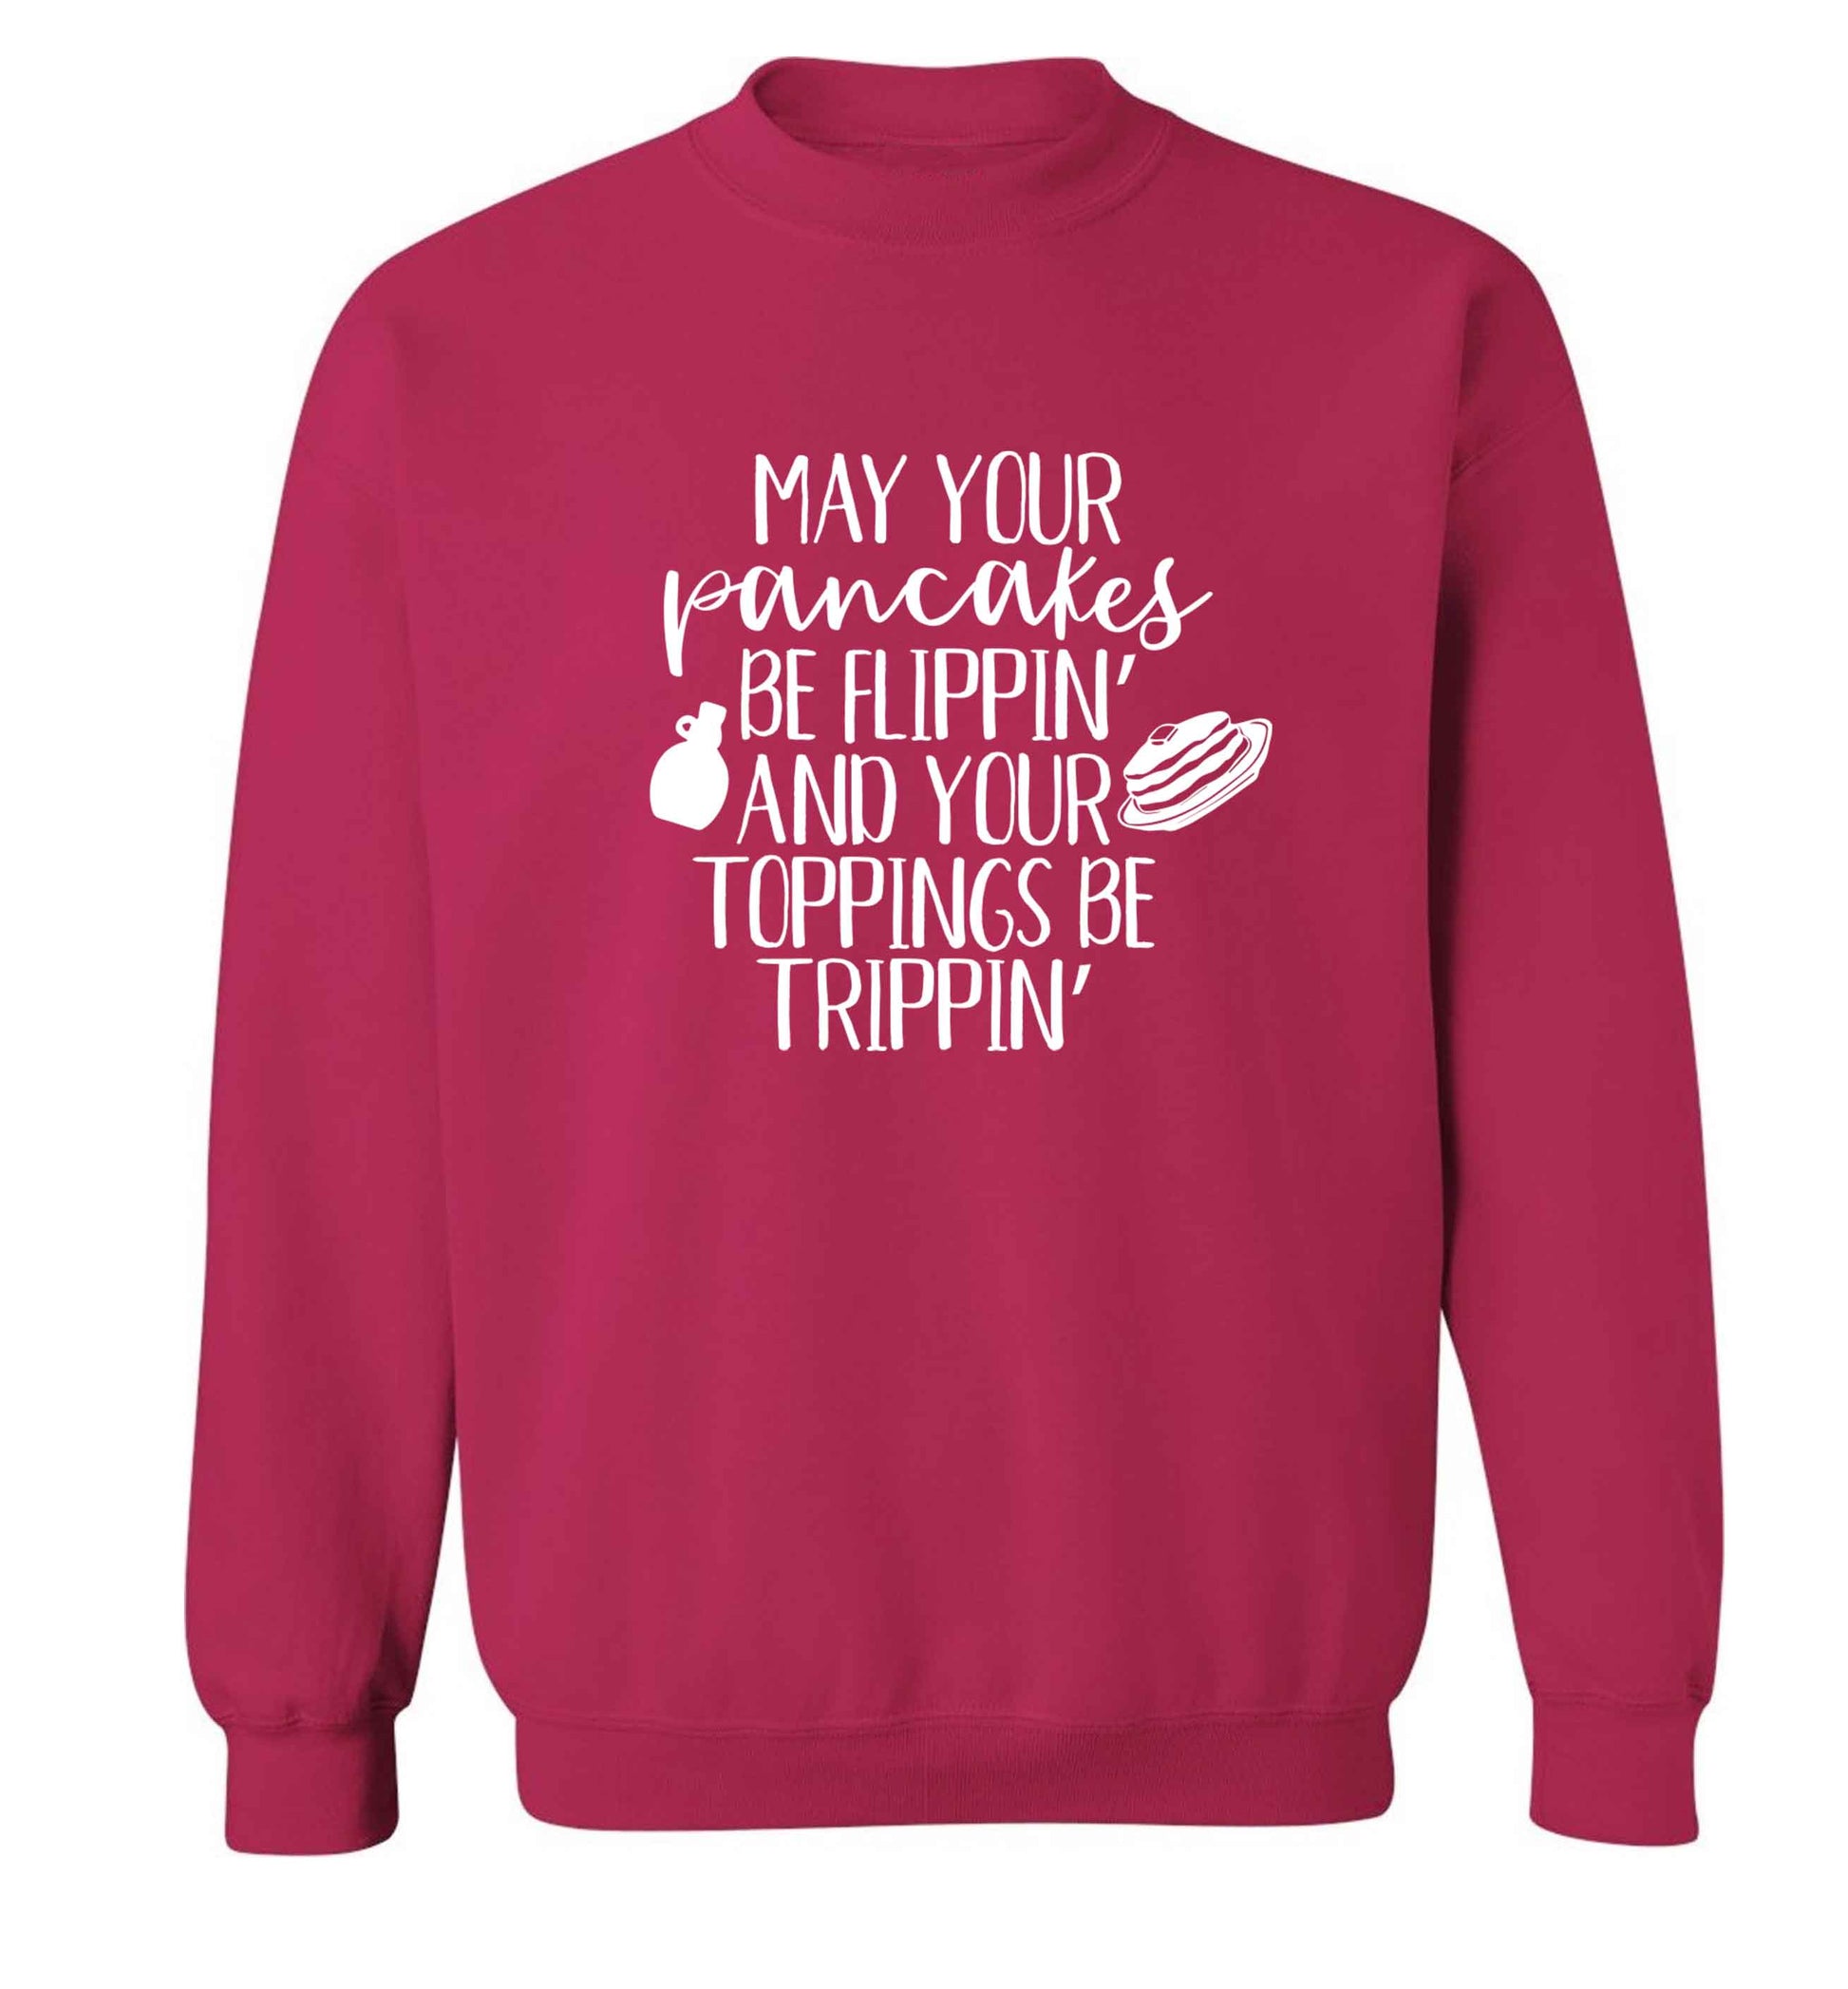 May your pancakes be flippin' and your toppings be trippin' adult's unisex pink sweater 2XL